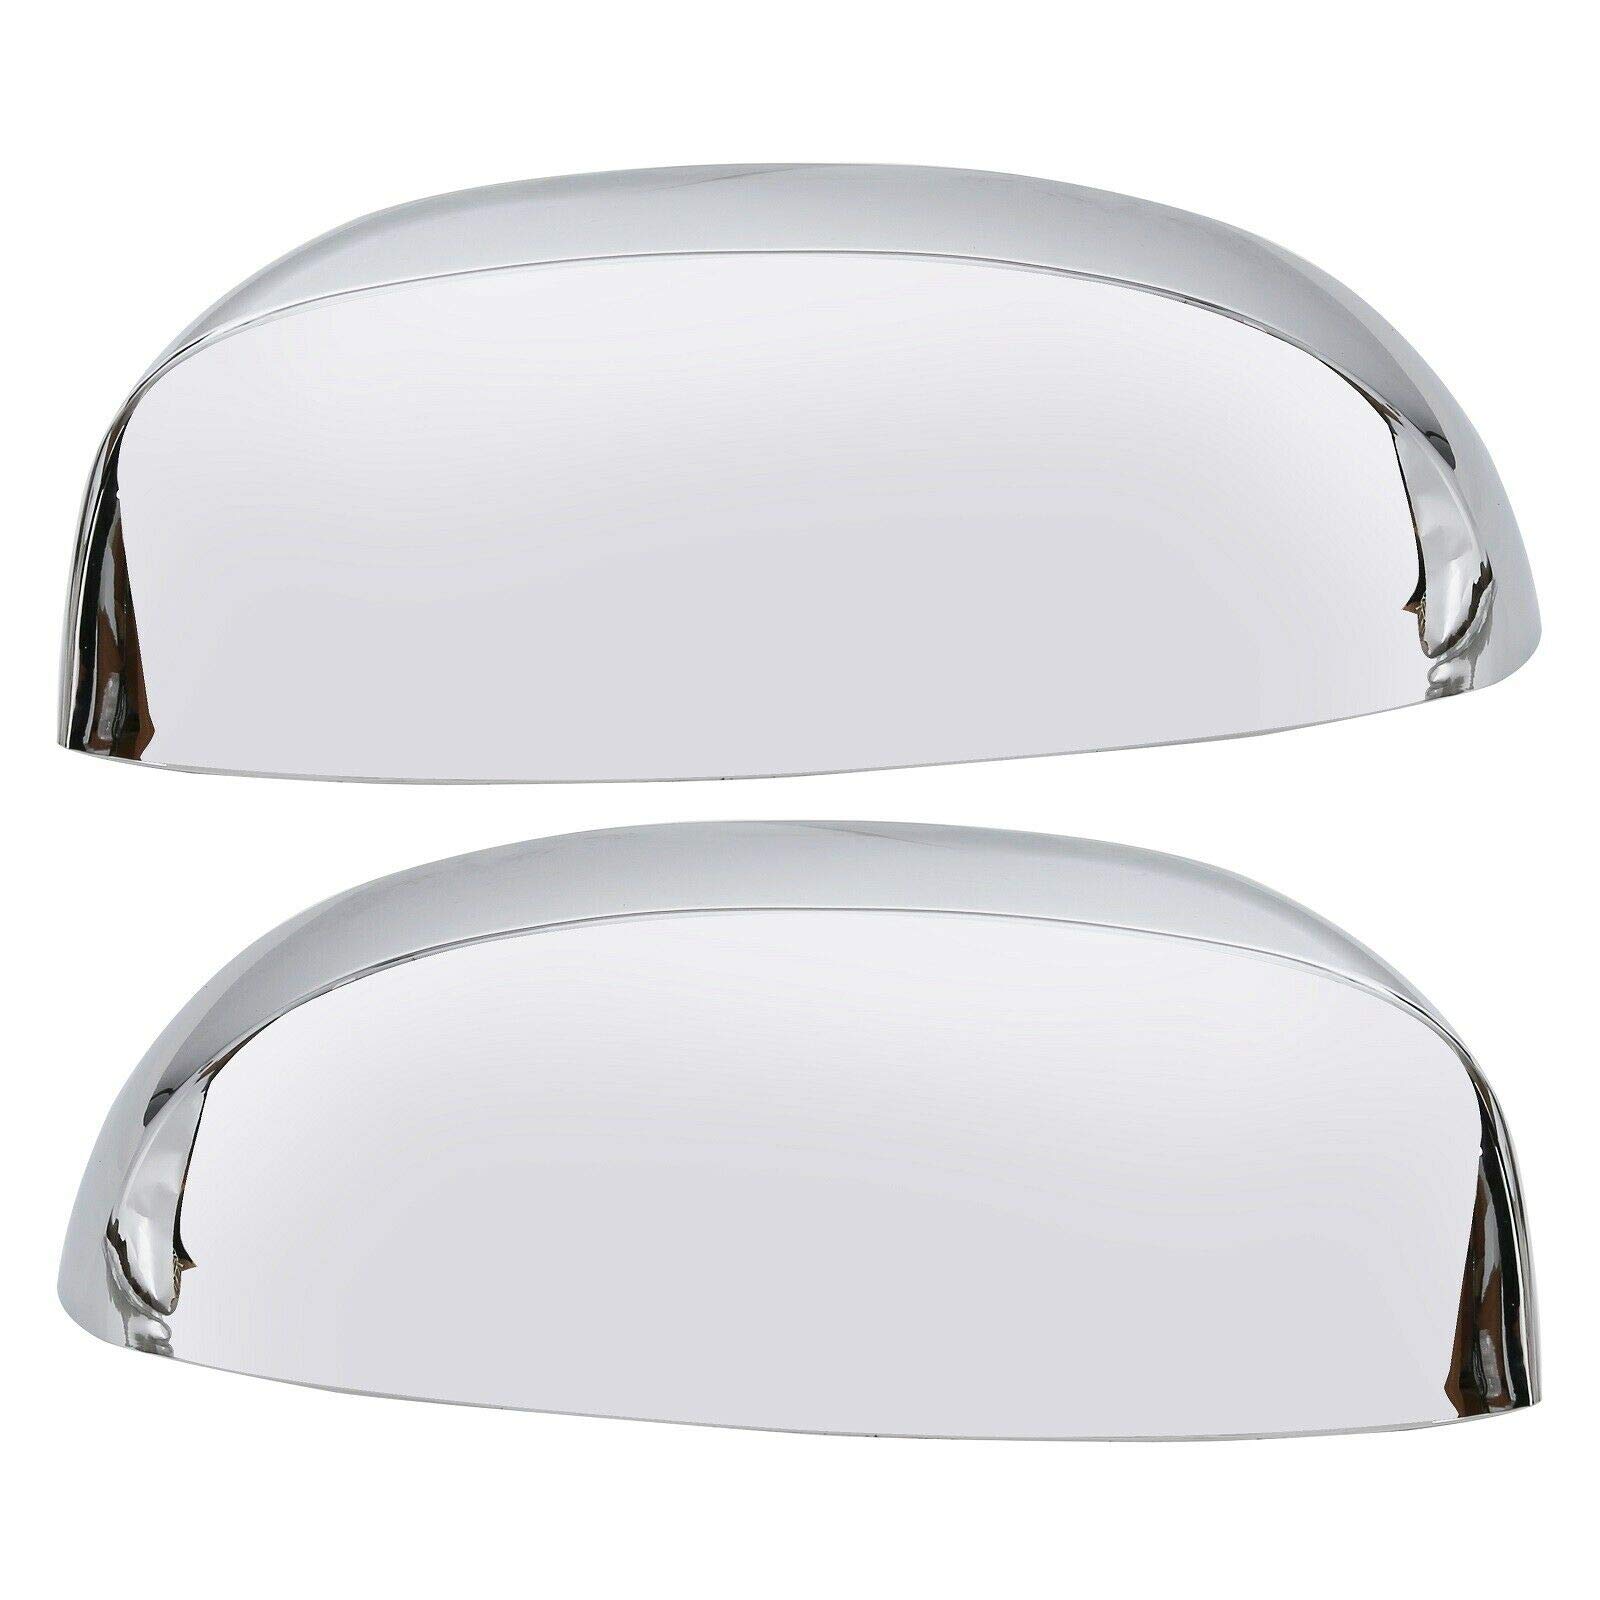 ALP Chrome plated Side View Mirror Replacement Skull Cap Units 2pcs with Clips Compatible With Silverado Sierra Suburban Tahoe Yukon XL Escalade